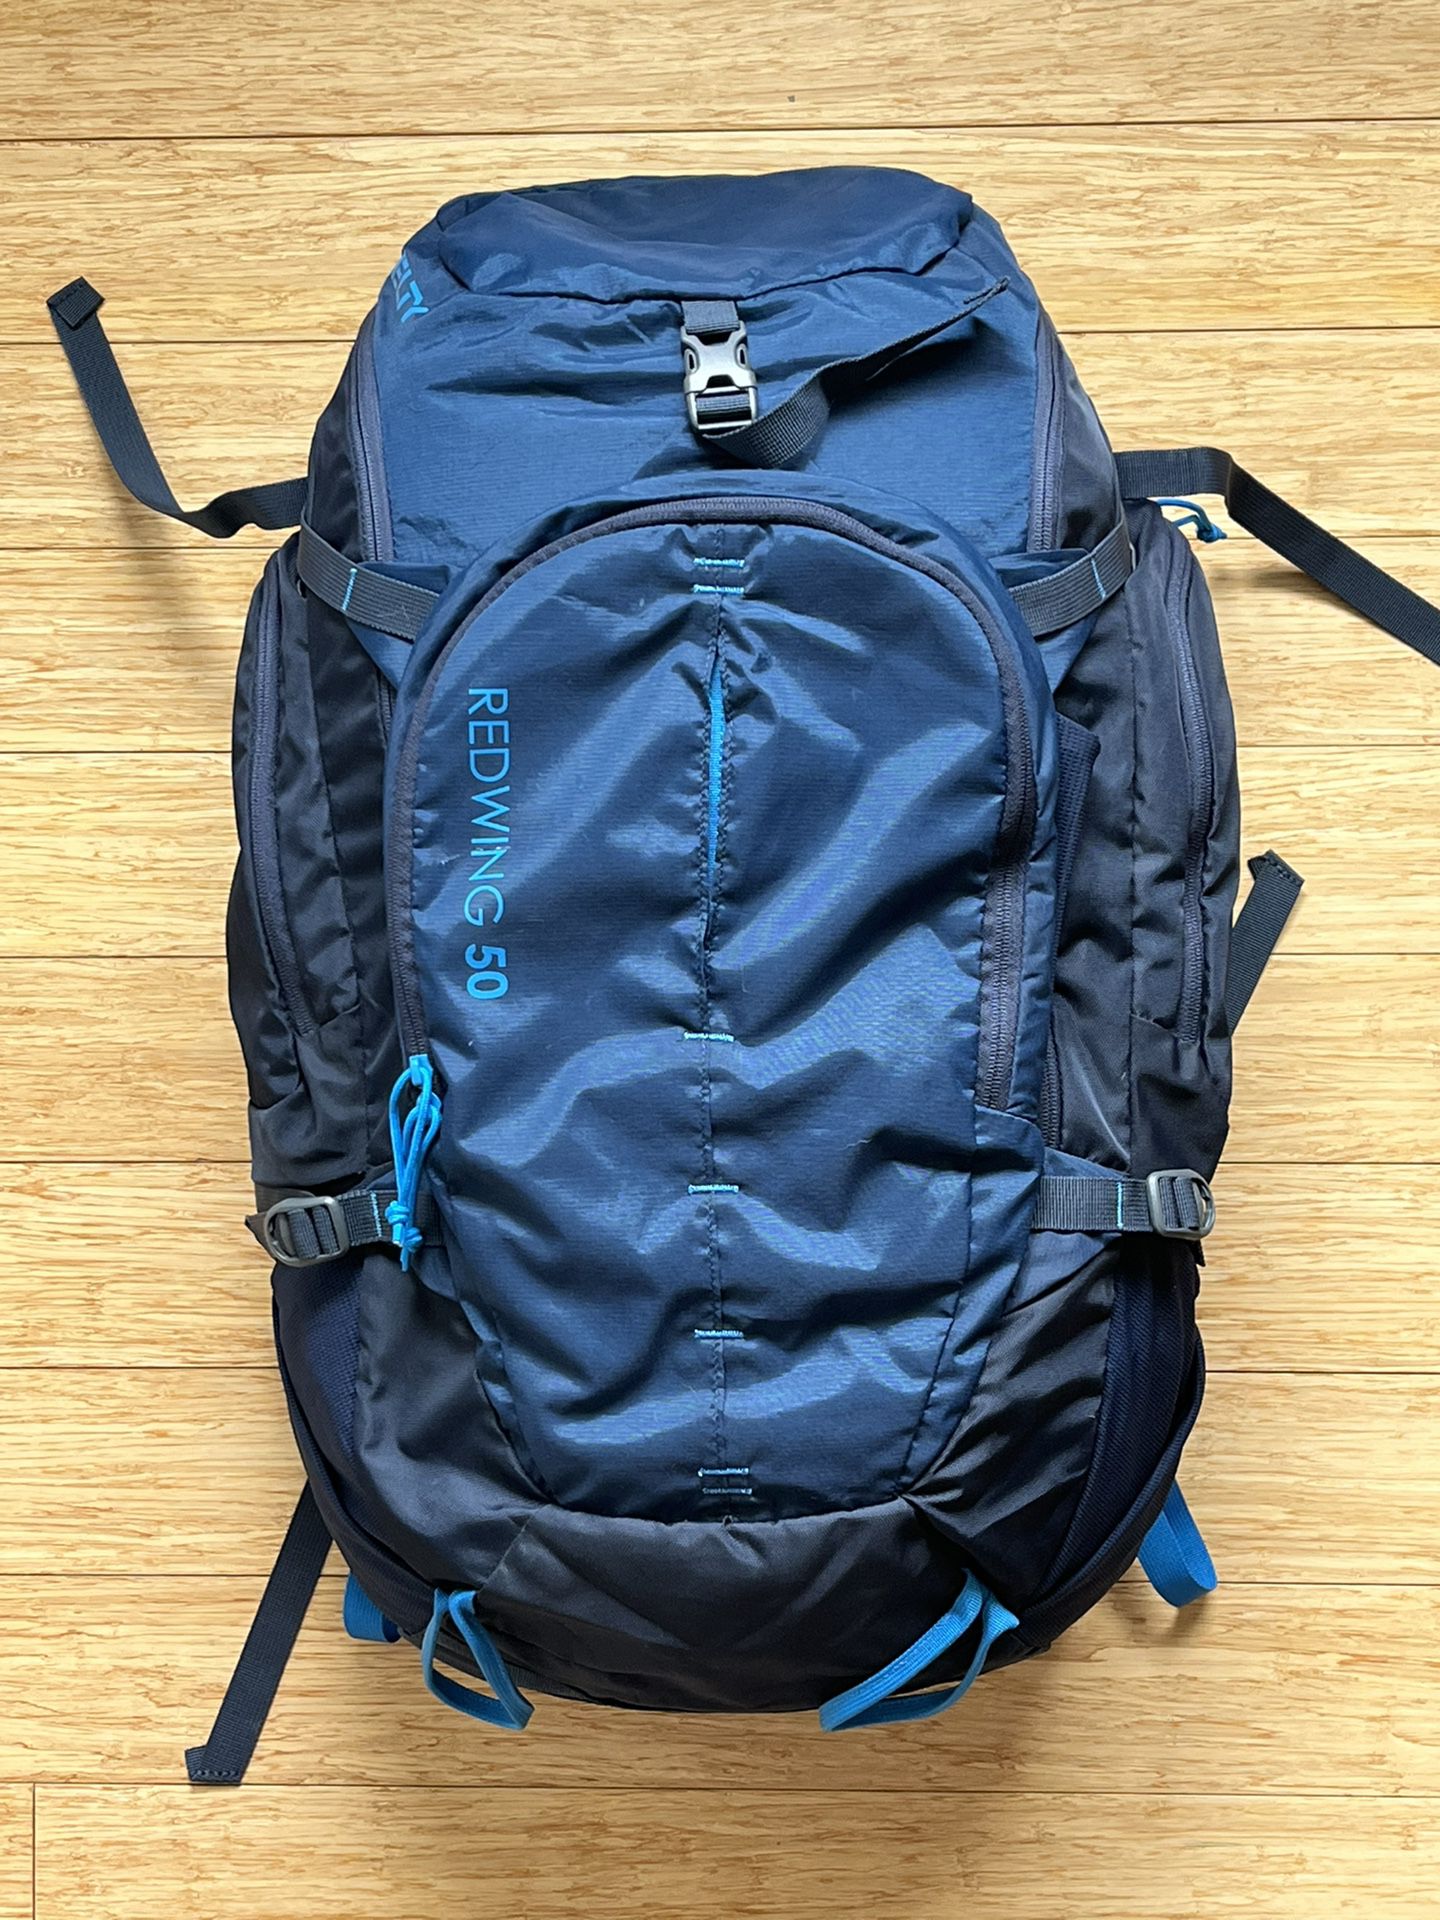 Kelty Redwing 50 Twilight Blue (contact info removed)6TW with Beaver Tail-----MINT CONDITION!!! 